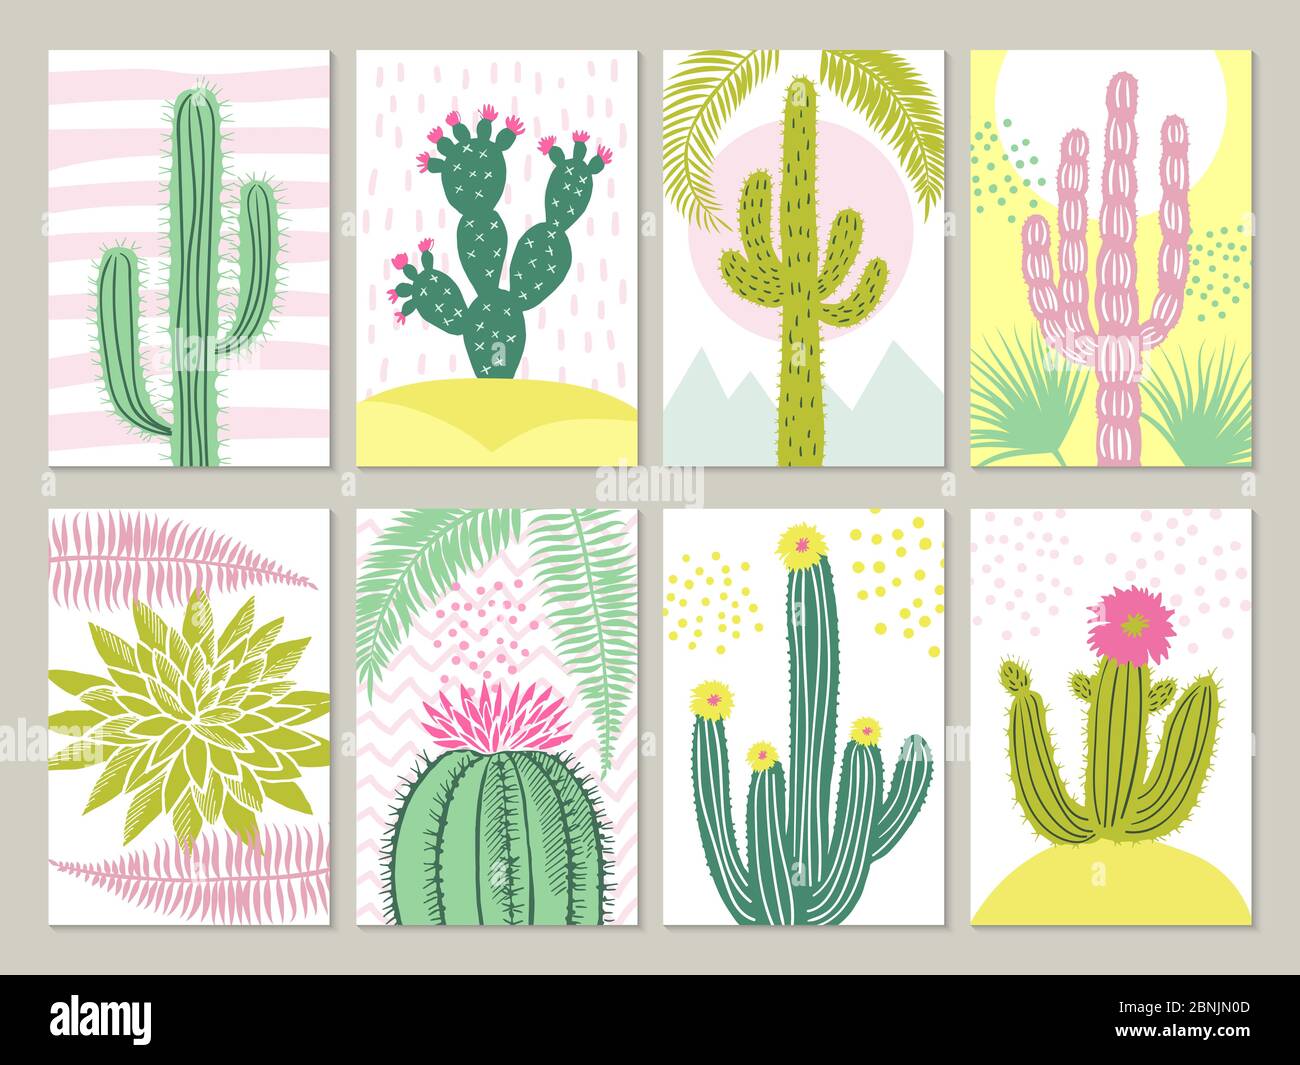 Cards template with pictures of cactuses Stock Vector